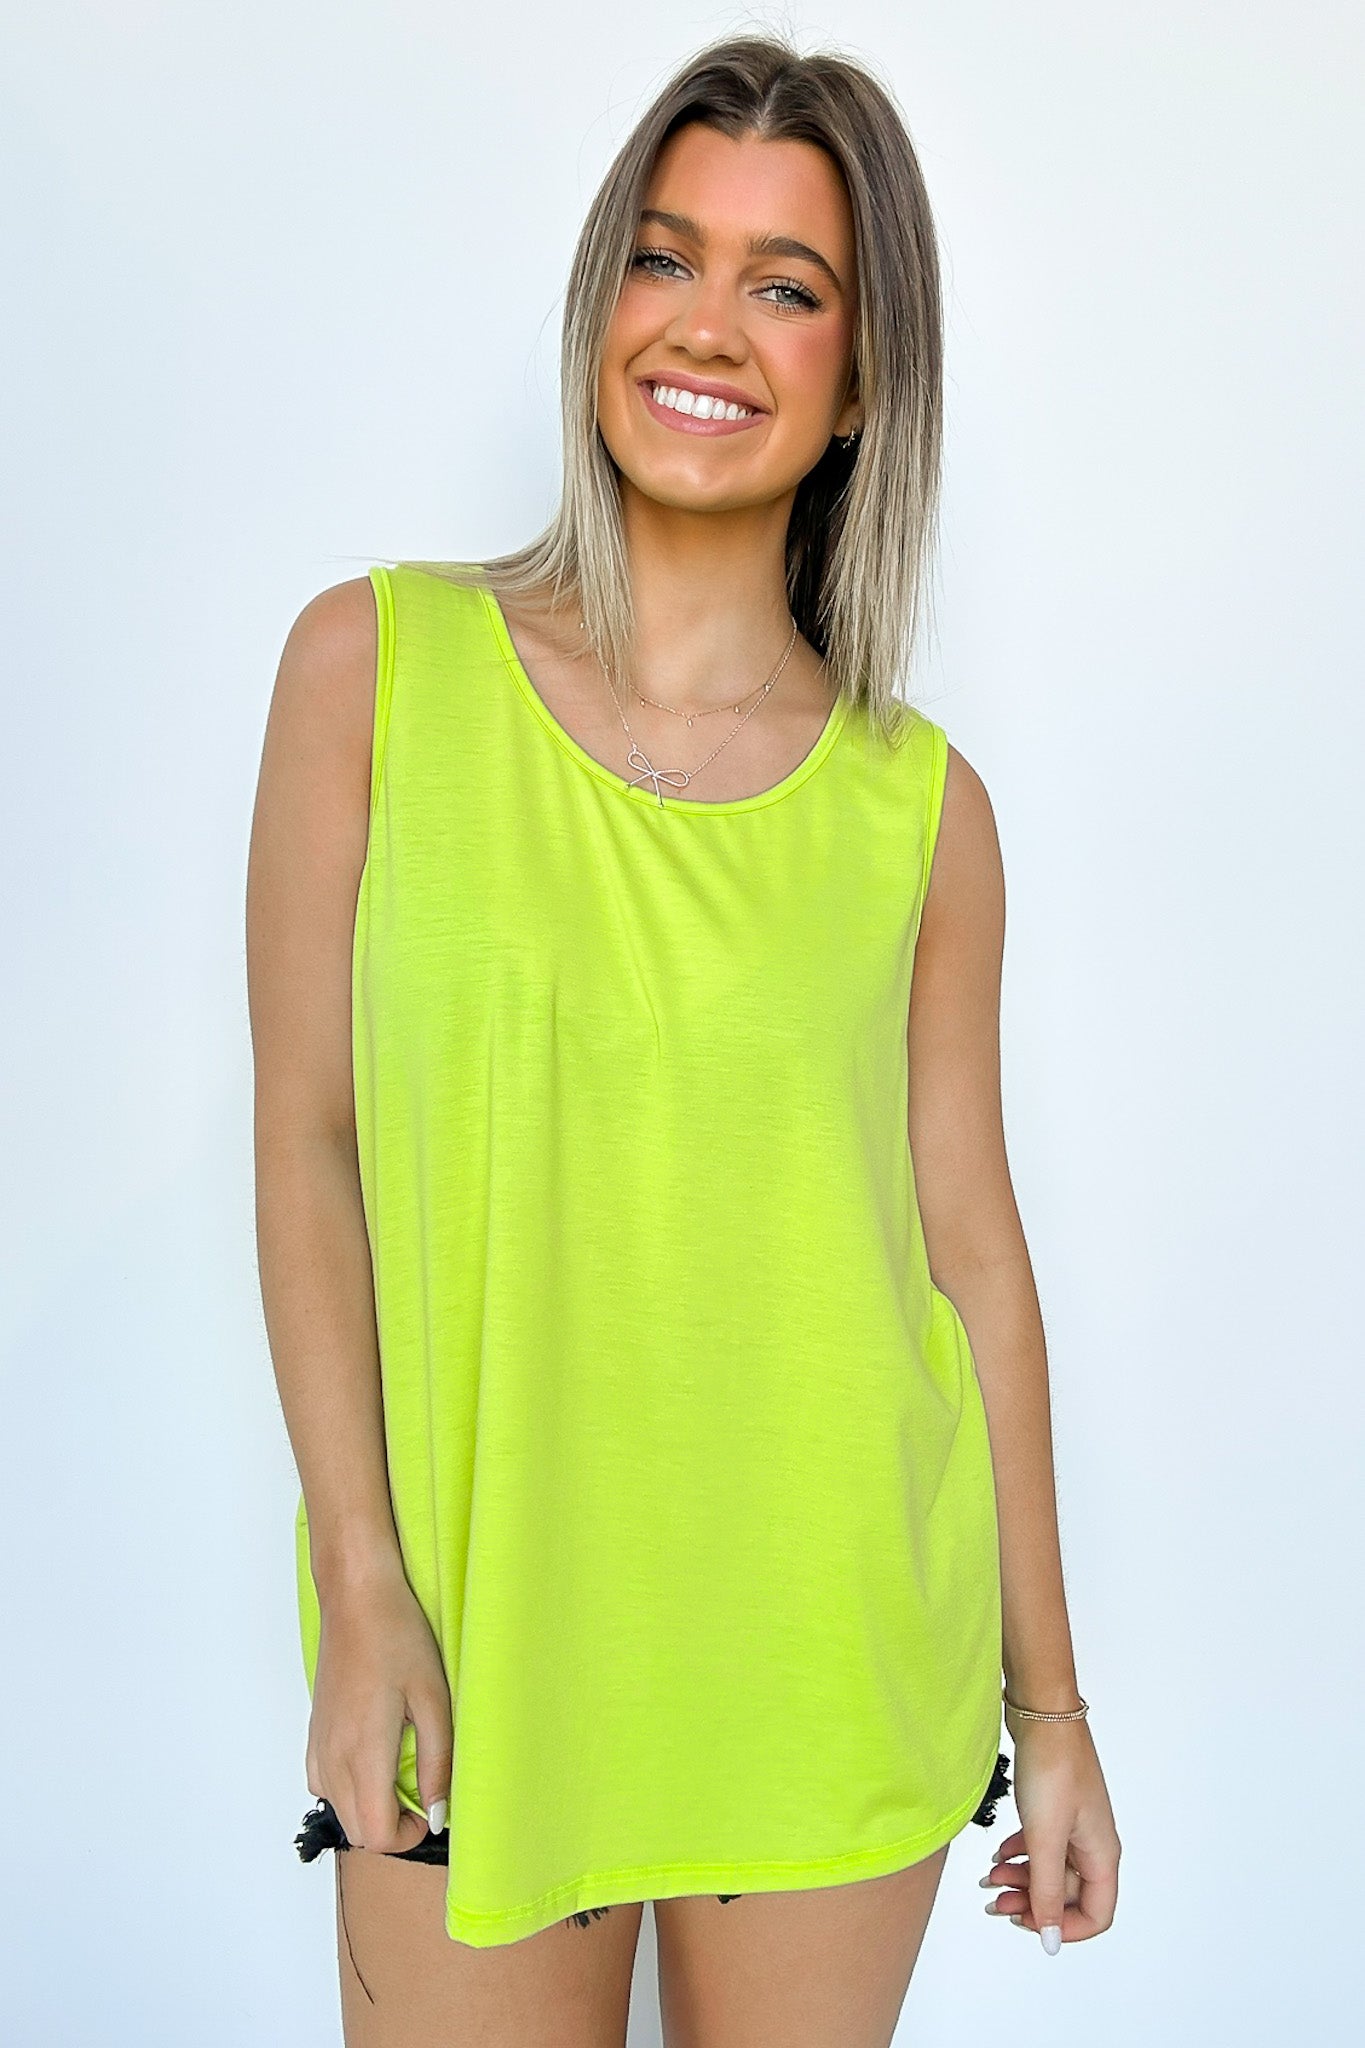  Russo Flowy Tank Top - Madison and Mallory